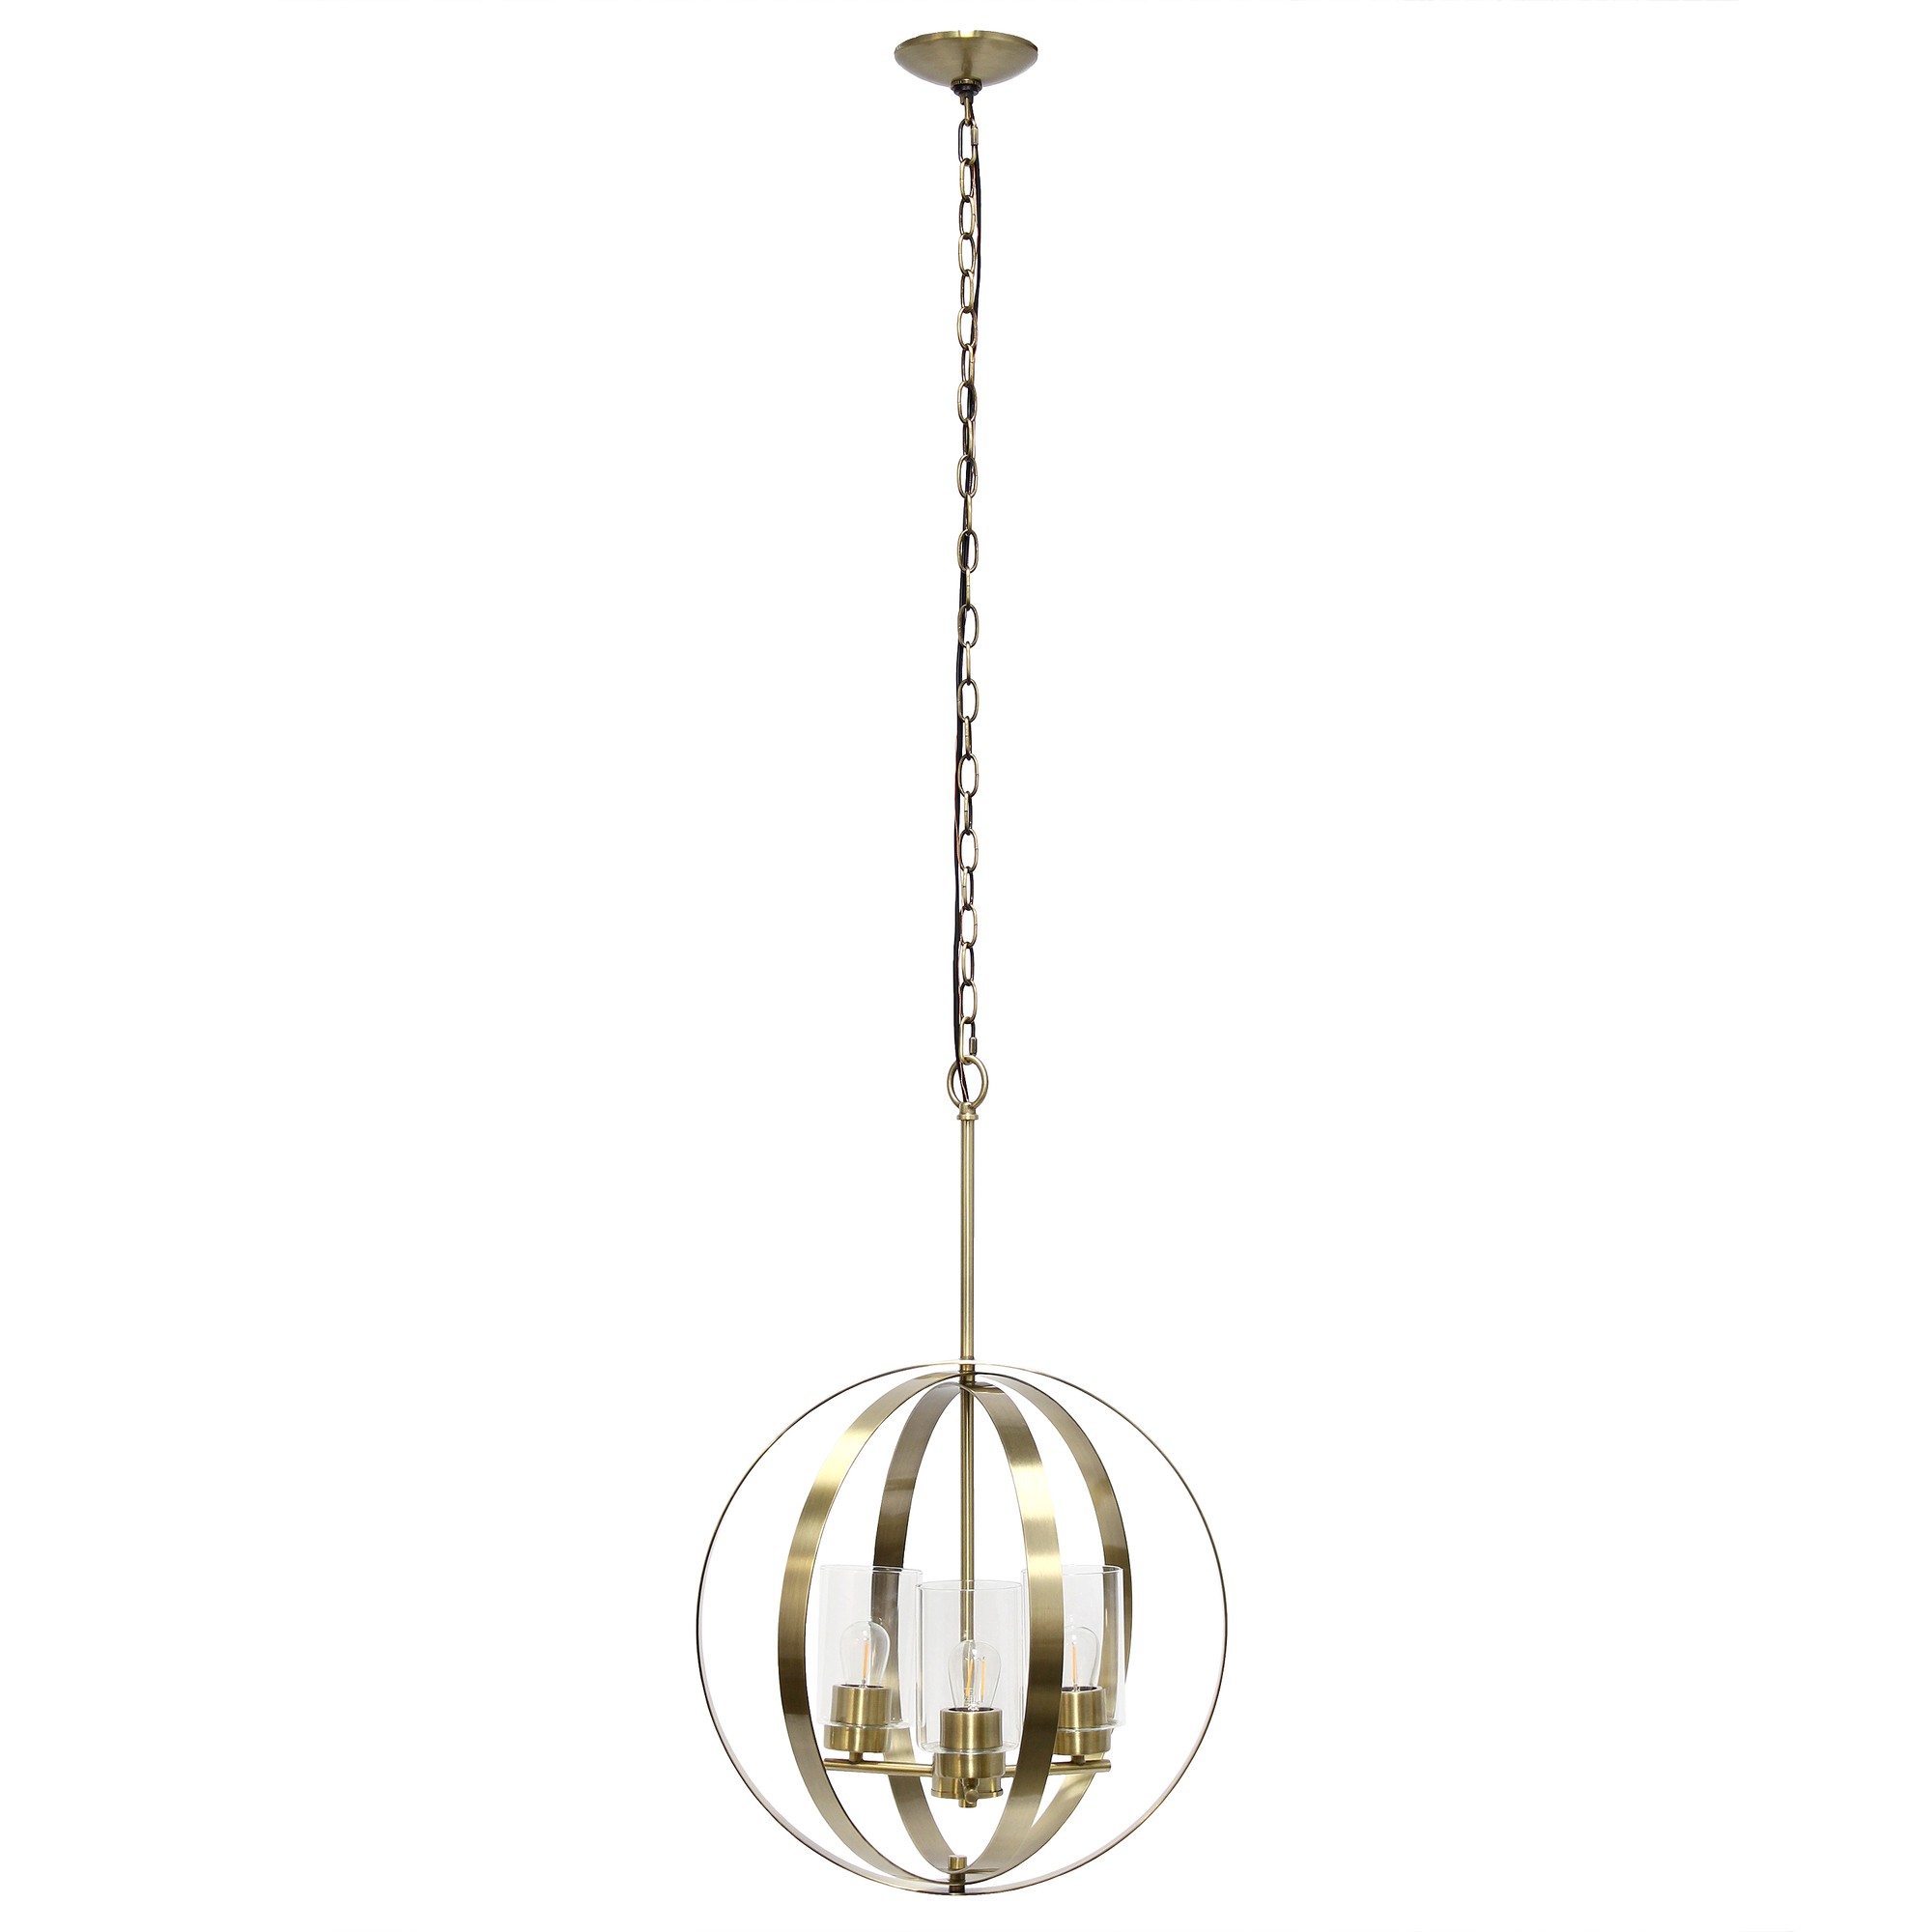 Lalia Home 3-Light 18" Adjustable Industrial Globe Hanging Metal and Clear Glass Ceiling Pendant, Antique Brass